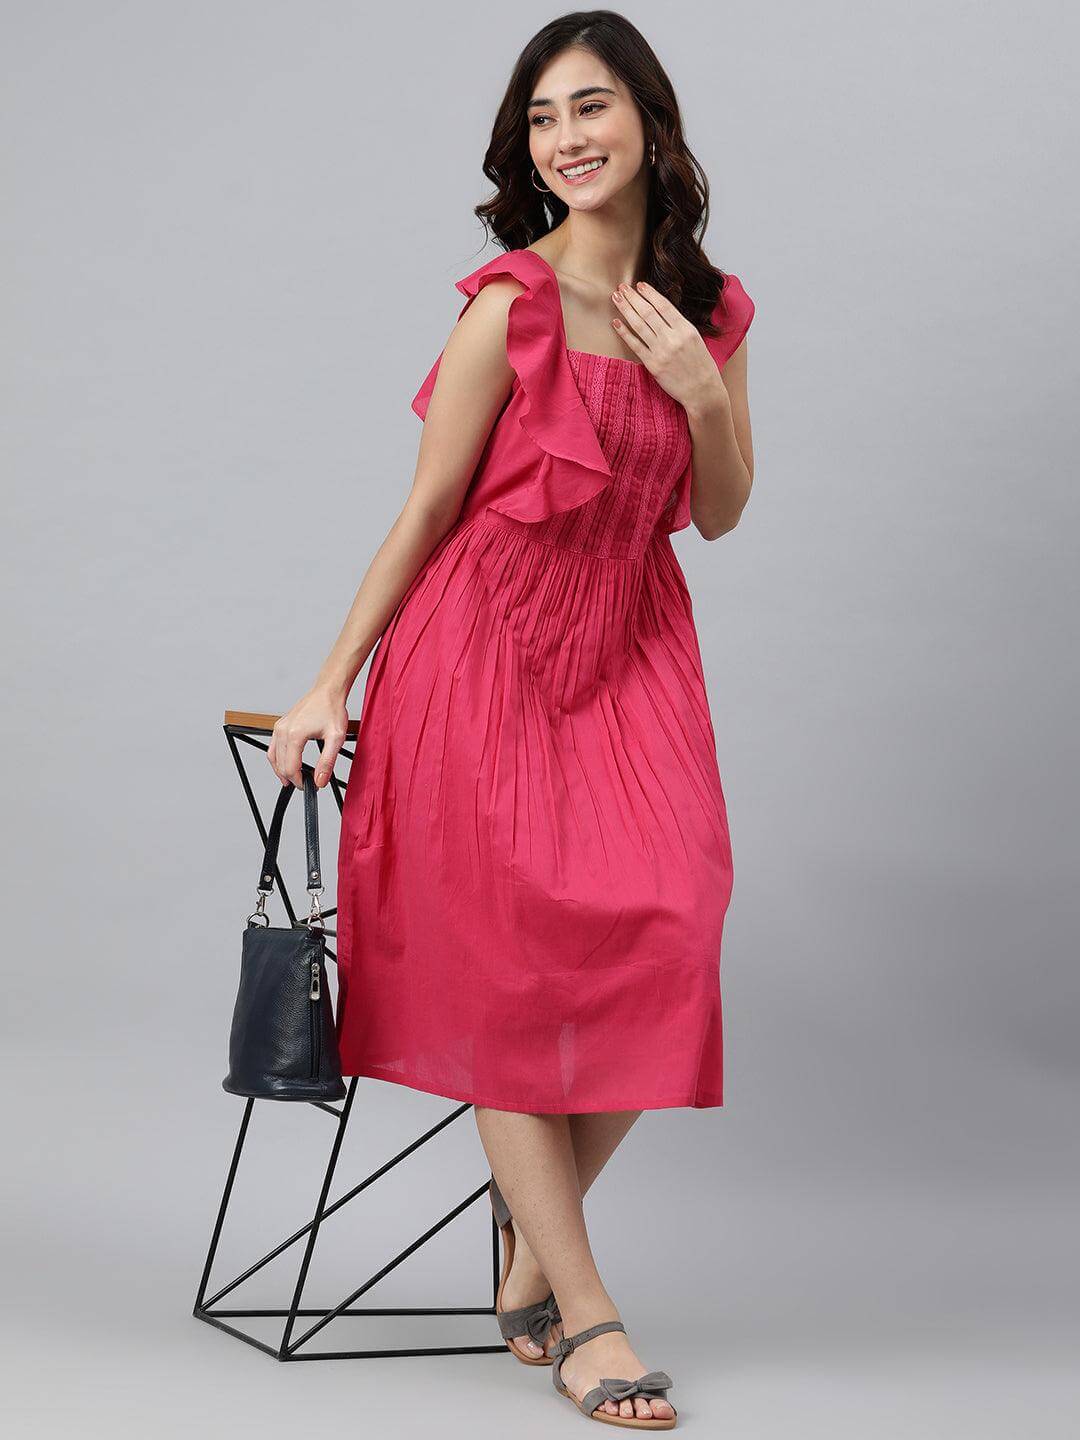 Pink Cotton Solid Flared Western Dress